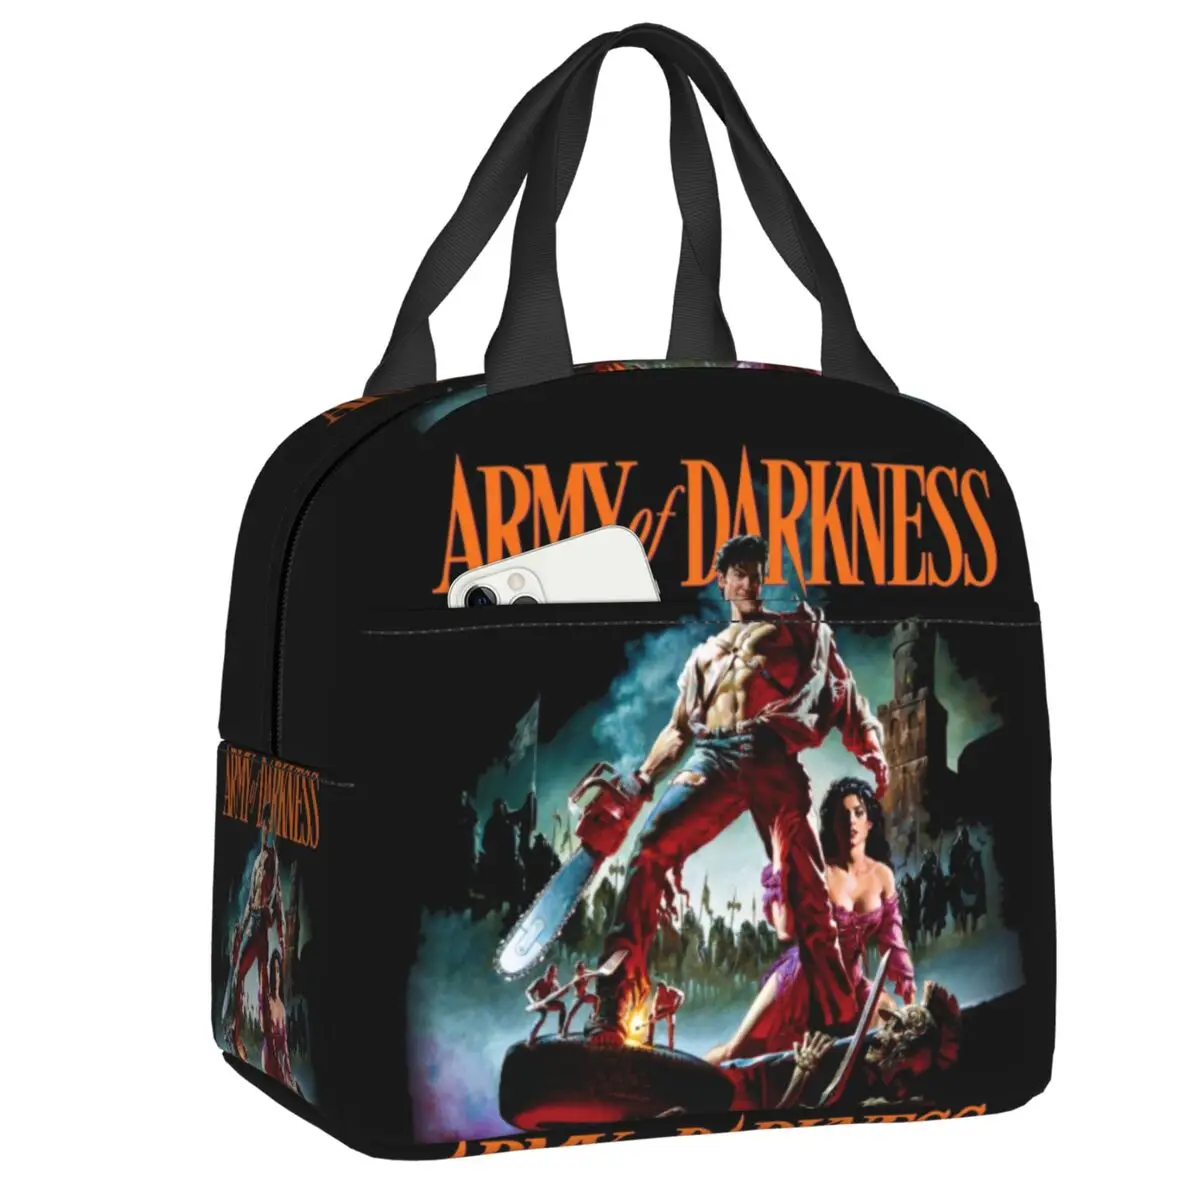 

Army Of Darkness Sam Raimi Thermal Insulated Lunch Bag Women Horror Movie Evil Dead Portable Lunch Box for School Work Food Tote